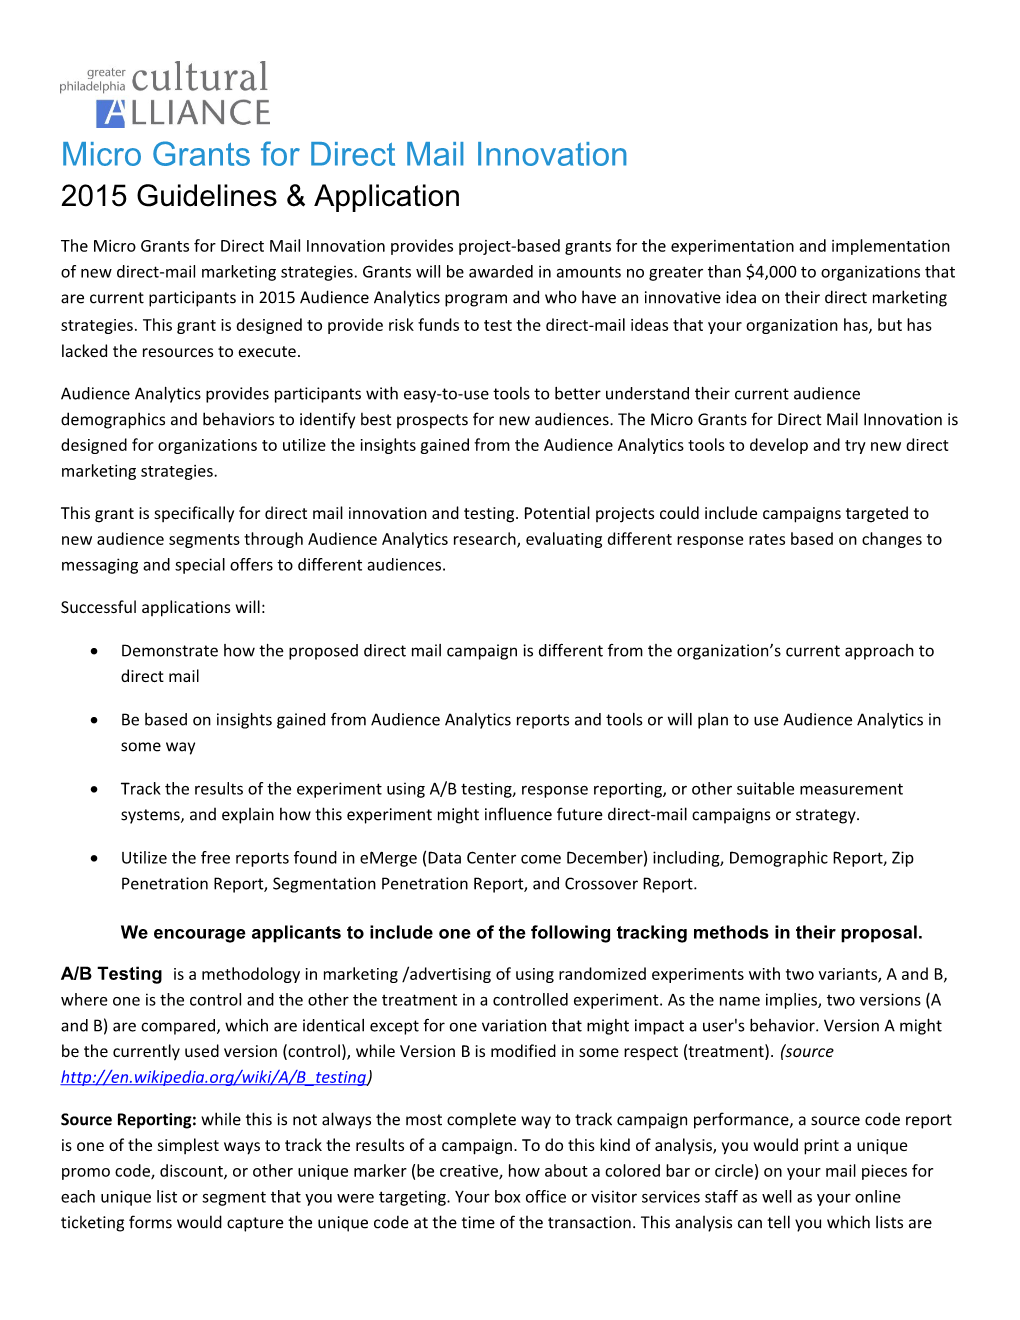 Micro Grants for Direct Mail Innovation 2015 Guidelines & Application